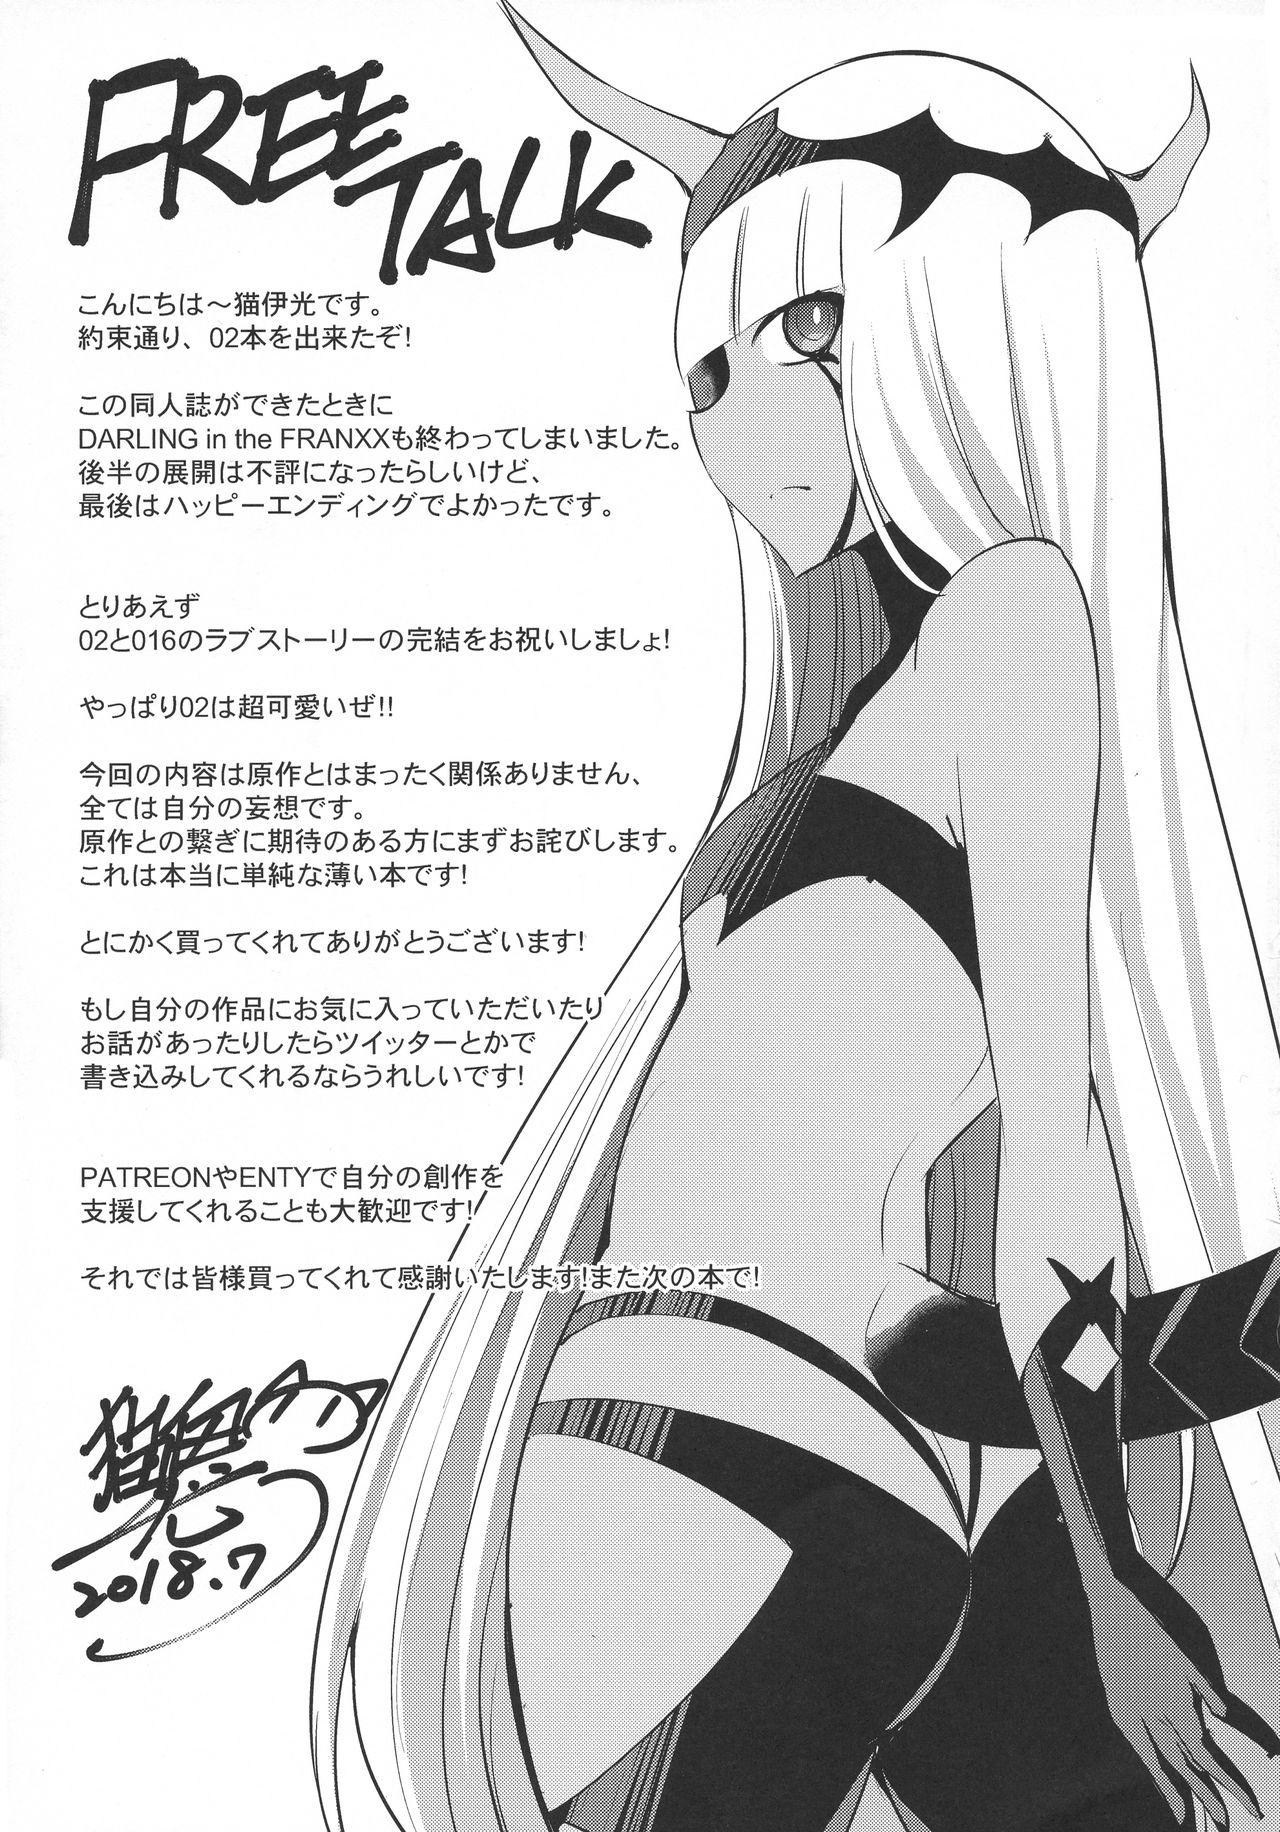 Black Thugs Darling in the One and Two - Darling in the franxx Underwear - Page 16